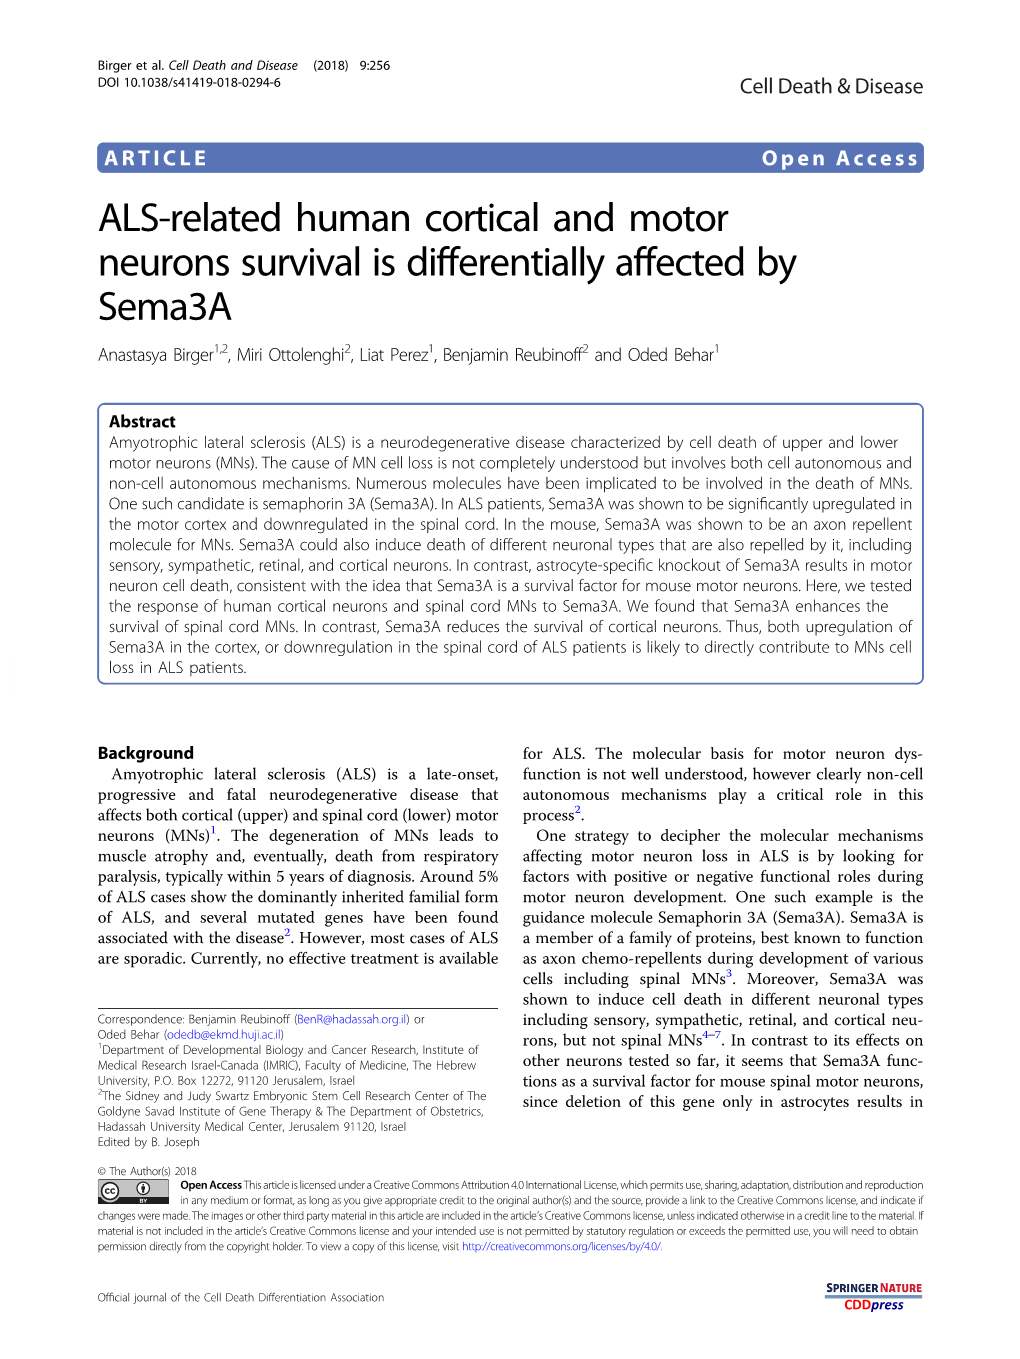 ALS-Related Human Cortical and Motor Neurons Survival Is Differentially